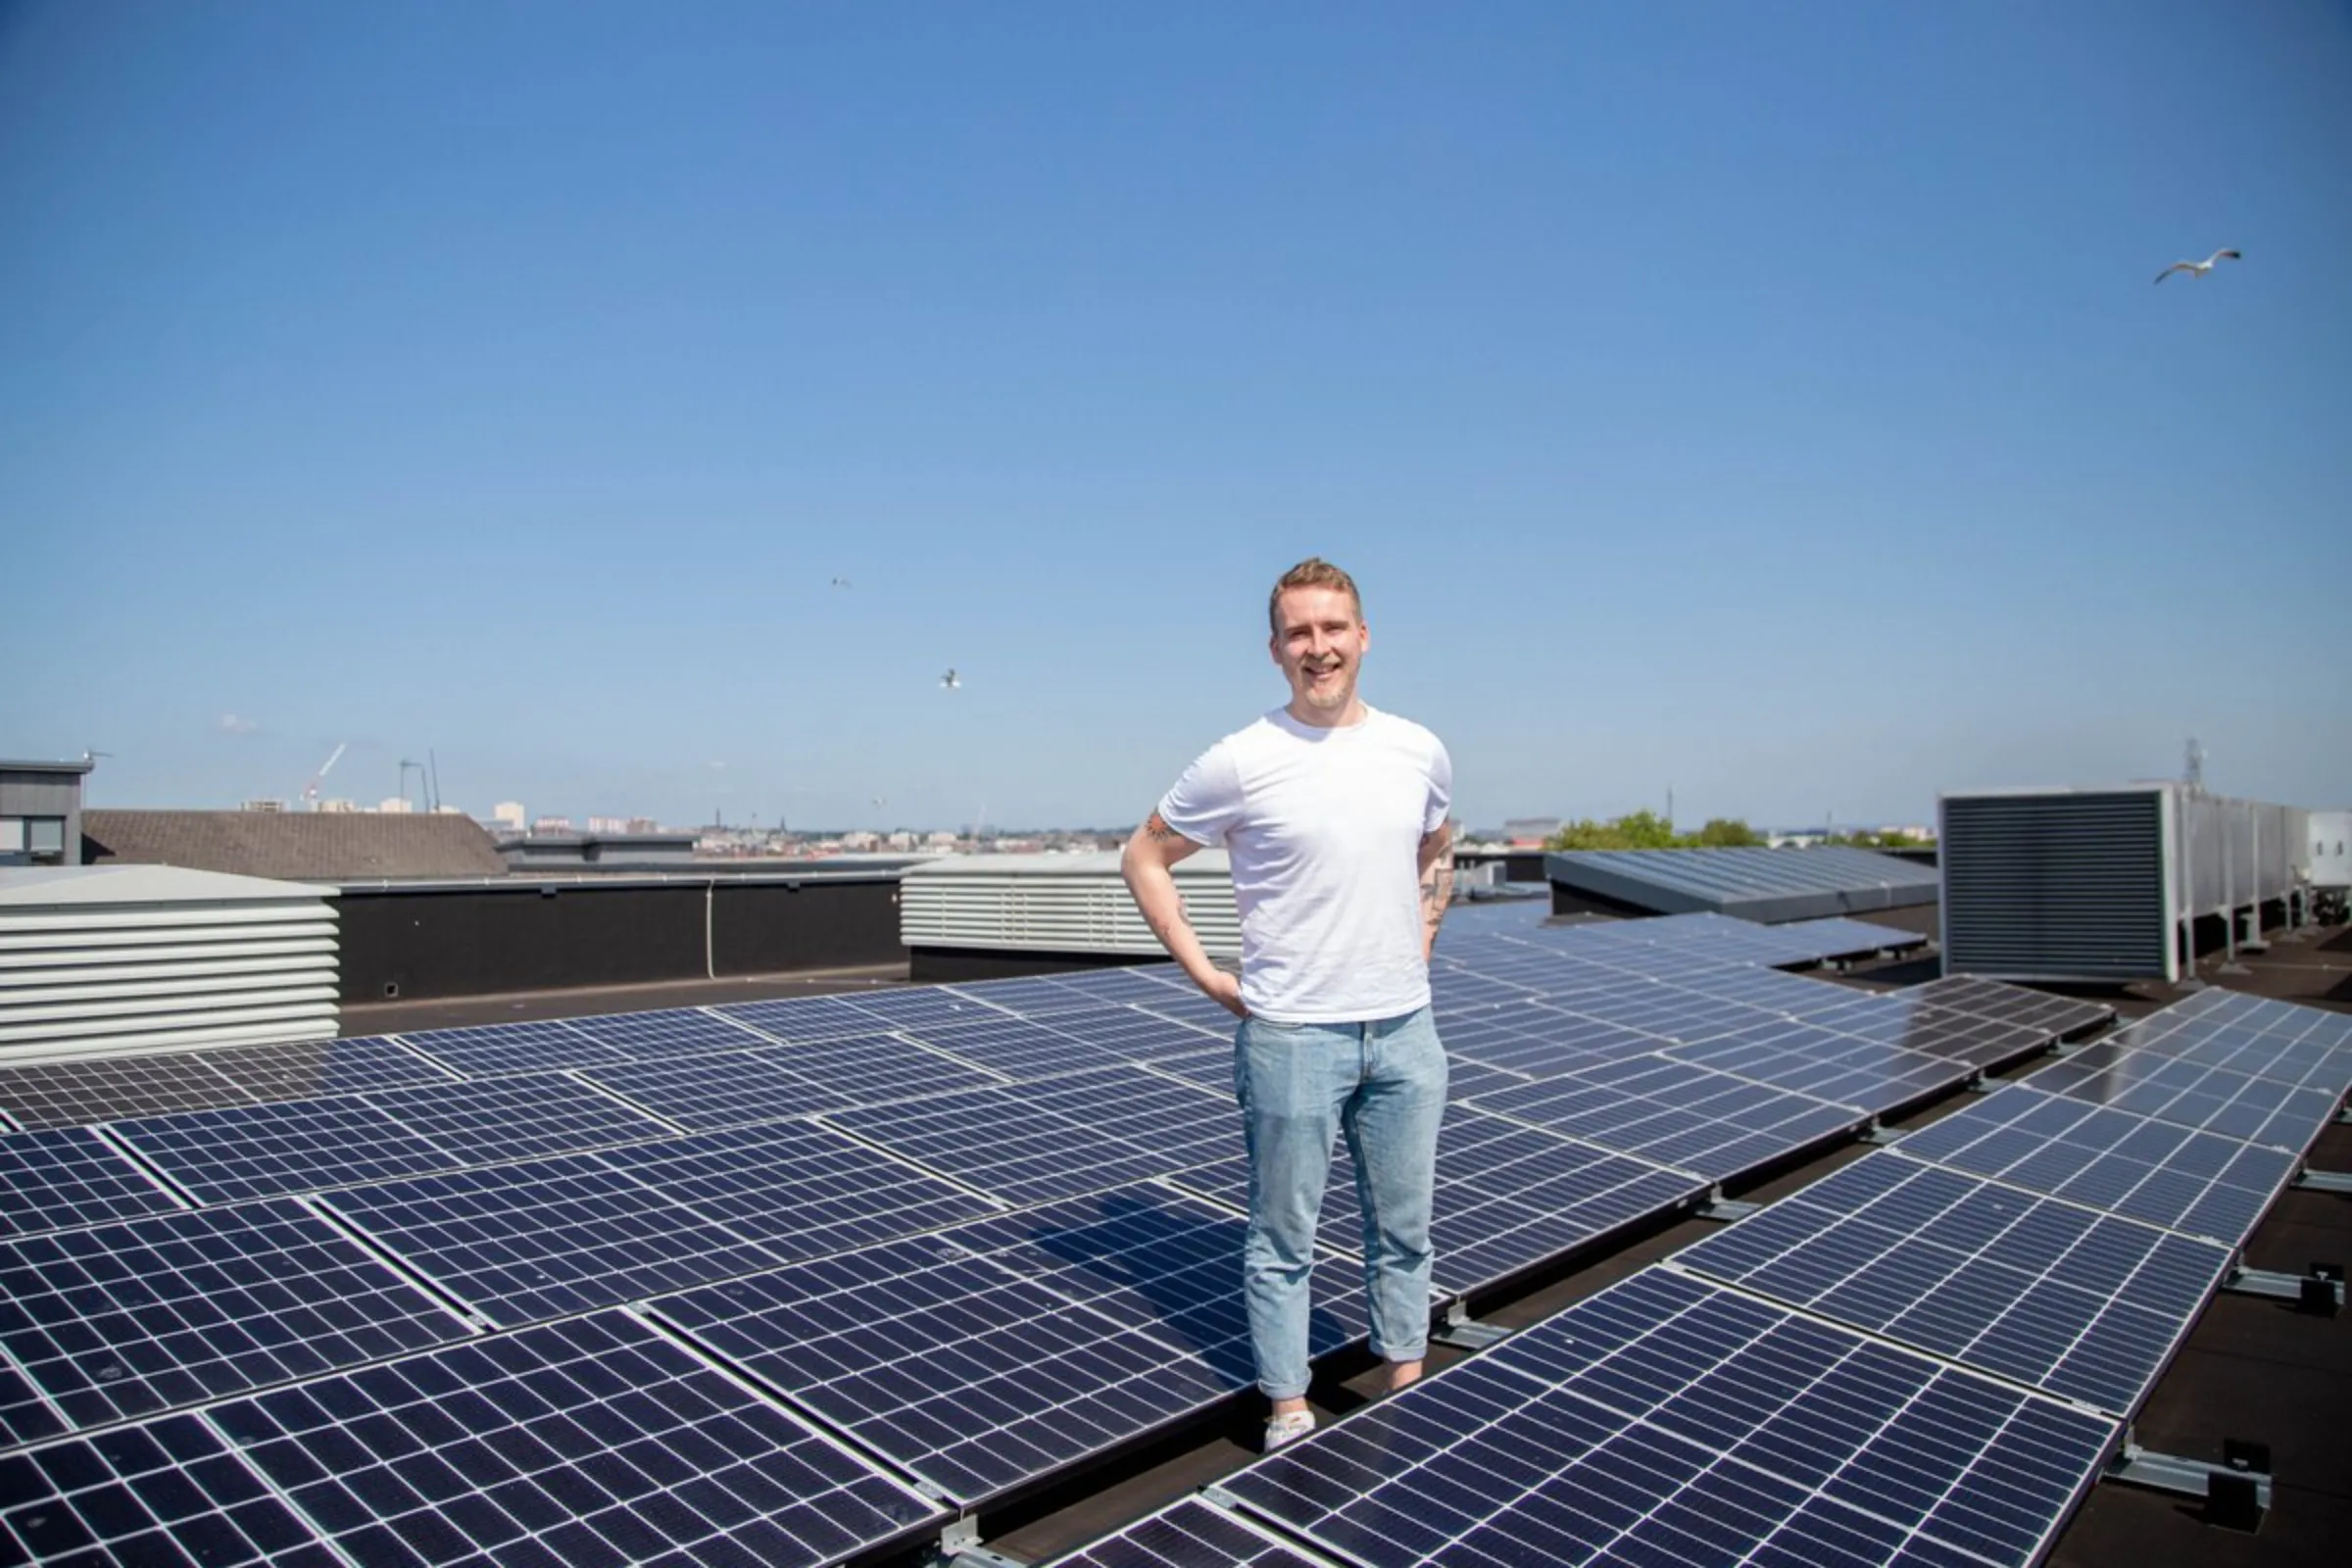 Glasgow Community Energy board member Fraser Stewart stands amid solar panels installed on top of the Glendale Primary School in Glasgow, United Kingdom, July 21, 2021